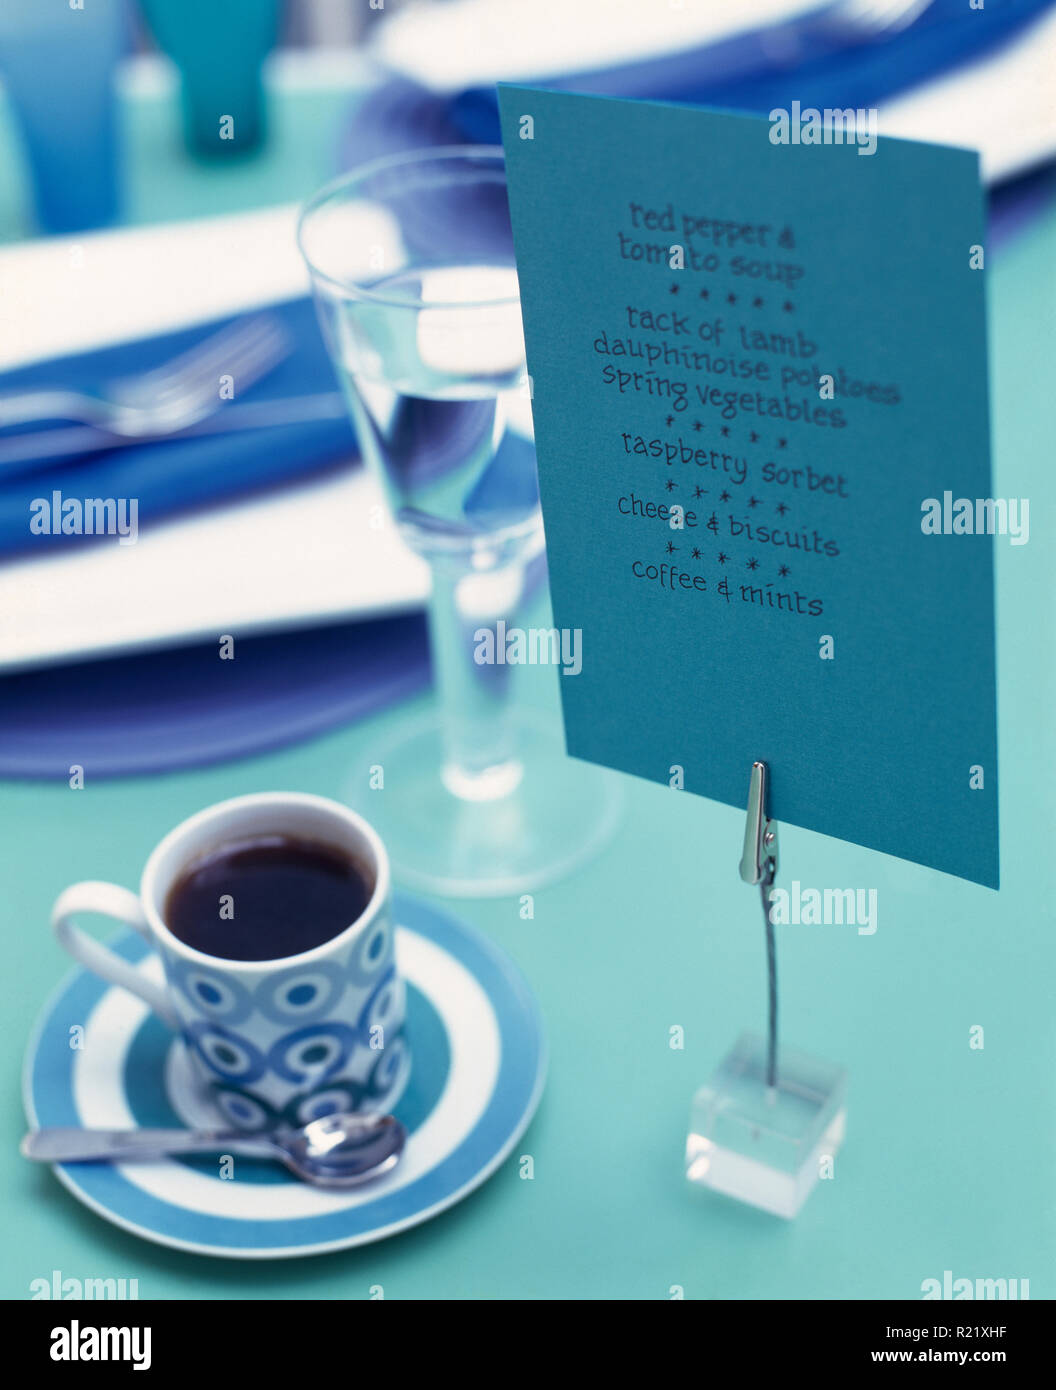 Close-up of a cup of coffee with menu on stand Stock Photo